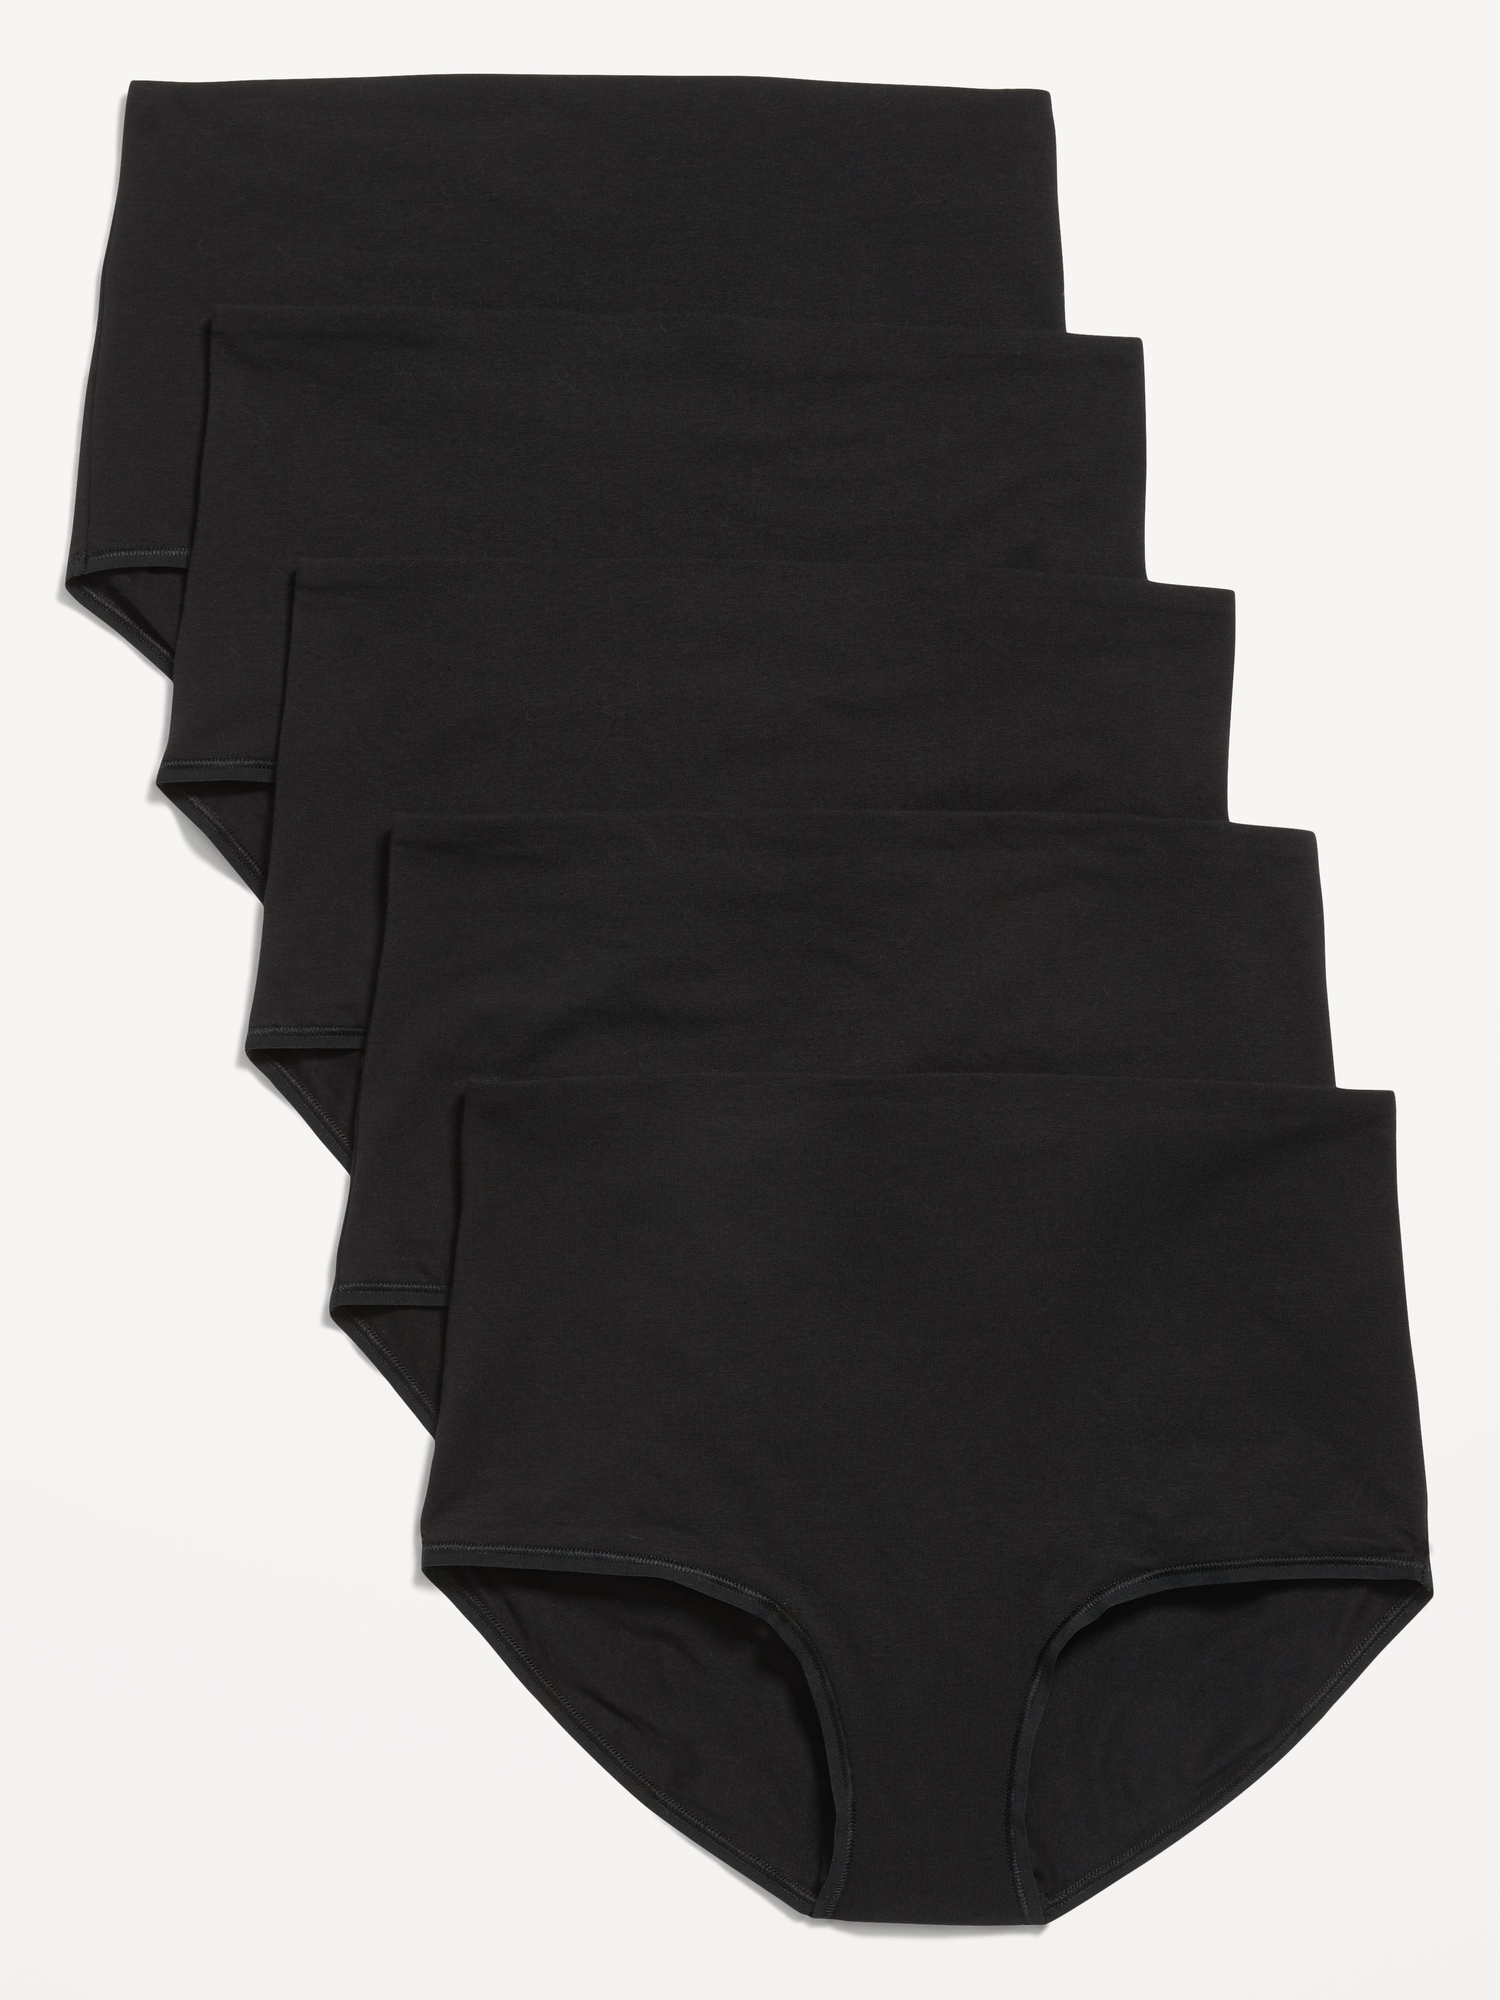 Old Navy Maternity 5-Pack Over-the-Bump Underwear Briefs black. 1